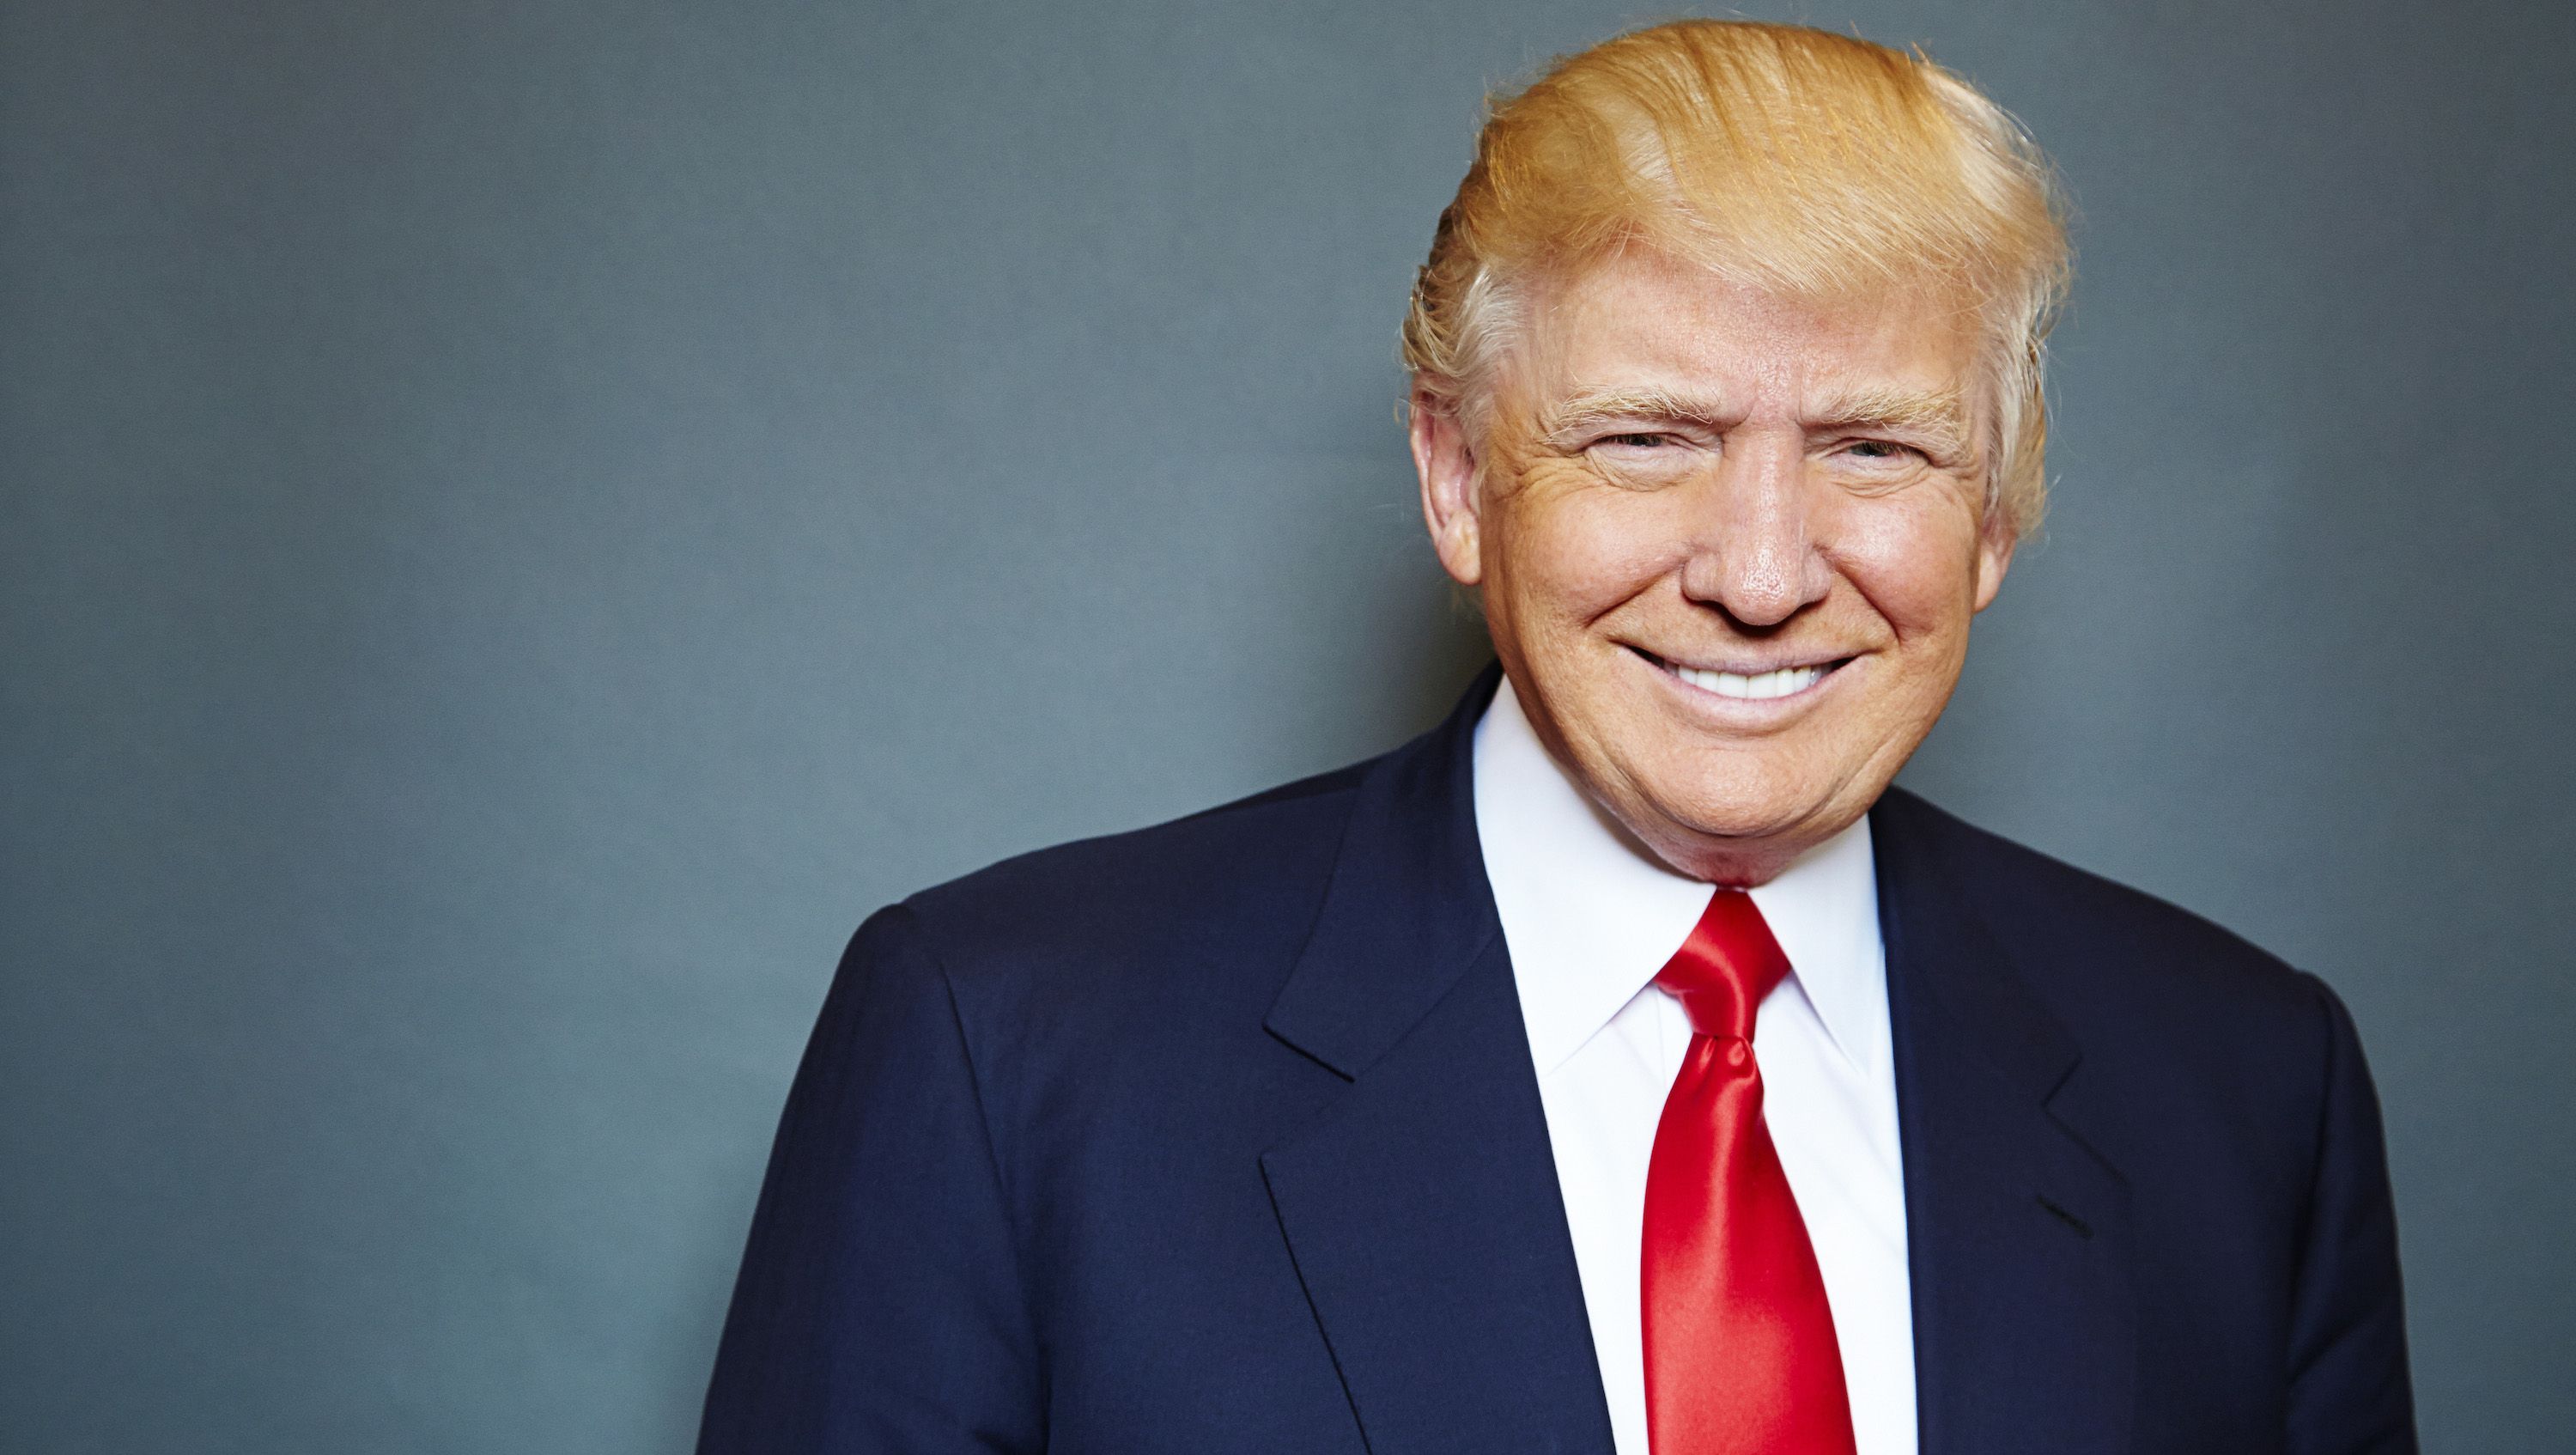 Donald Trump Wallpaper HD. to5animations.com Wallpaper, Gifs, Background, Image